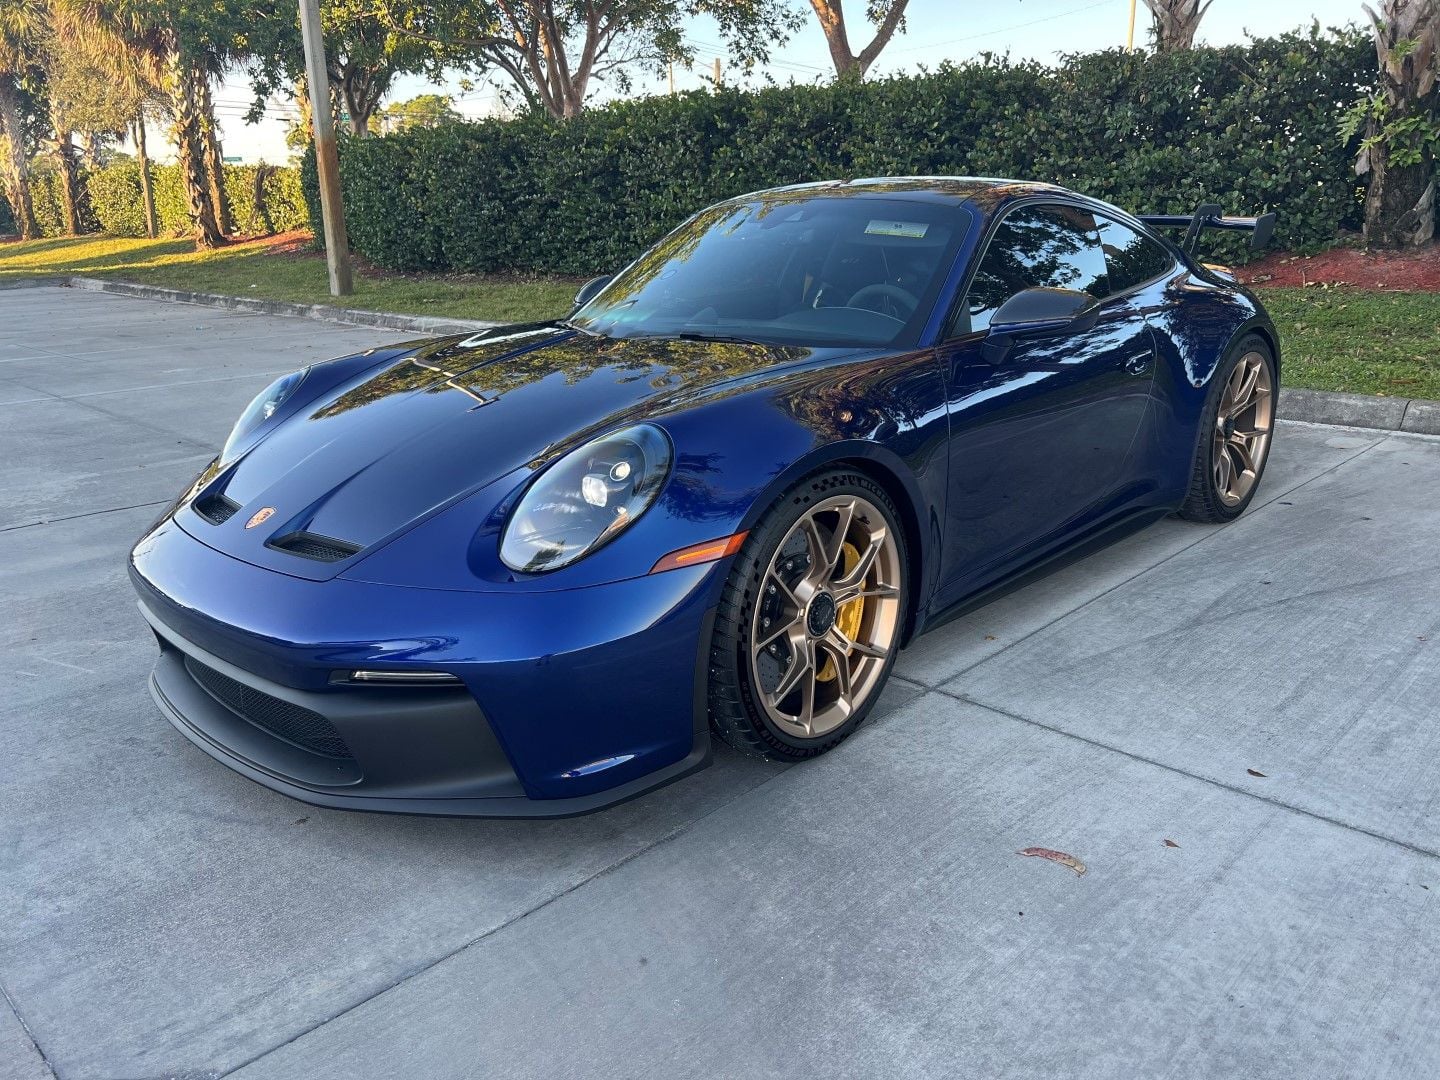 2021 Porsche 911 - 2022 Porsche 911 GT3 Gentian Blue full PPF - Used - VIN WP0AC2A95NS268557 - 715 Miles - 6 cyl - 2WD - Manual - Coupe - Blue - Twinsburg, OH 44087, United States